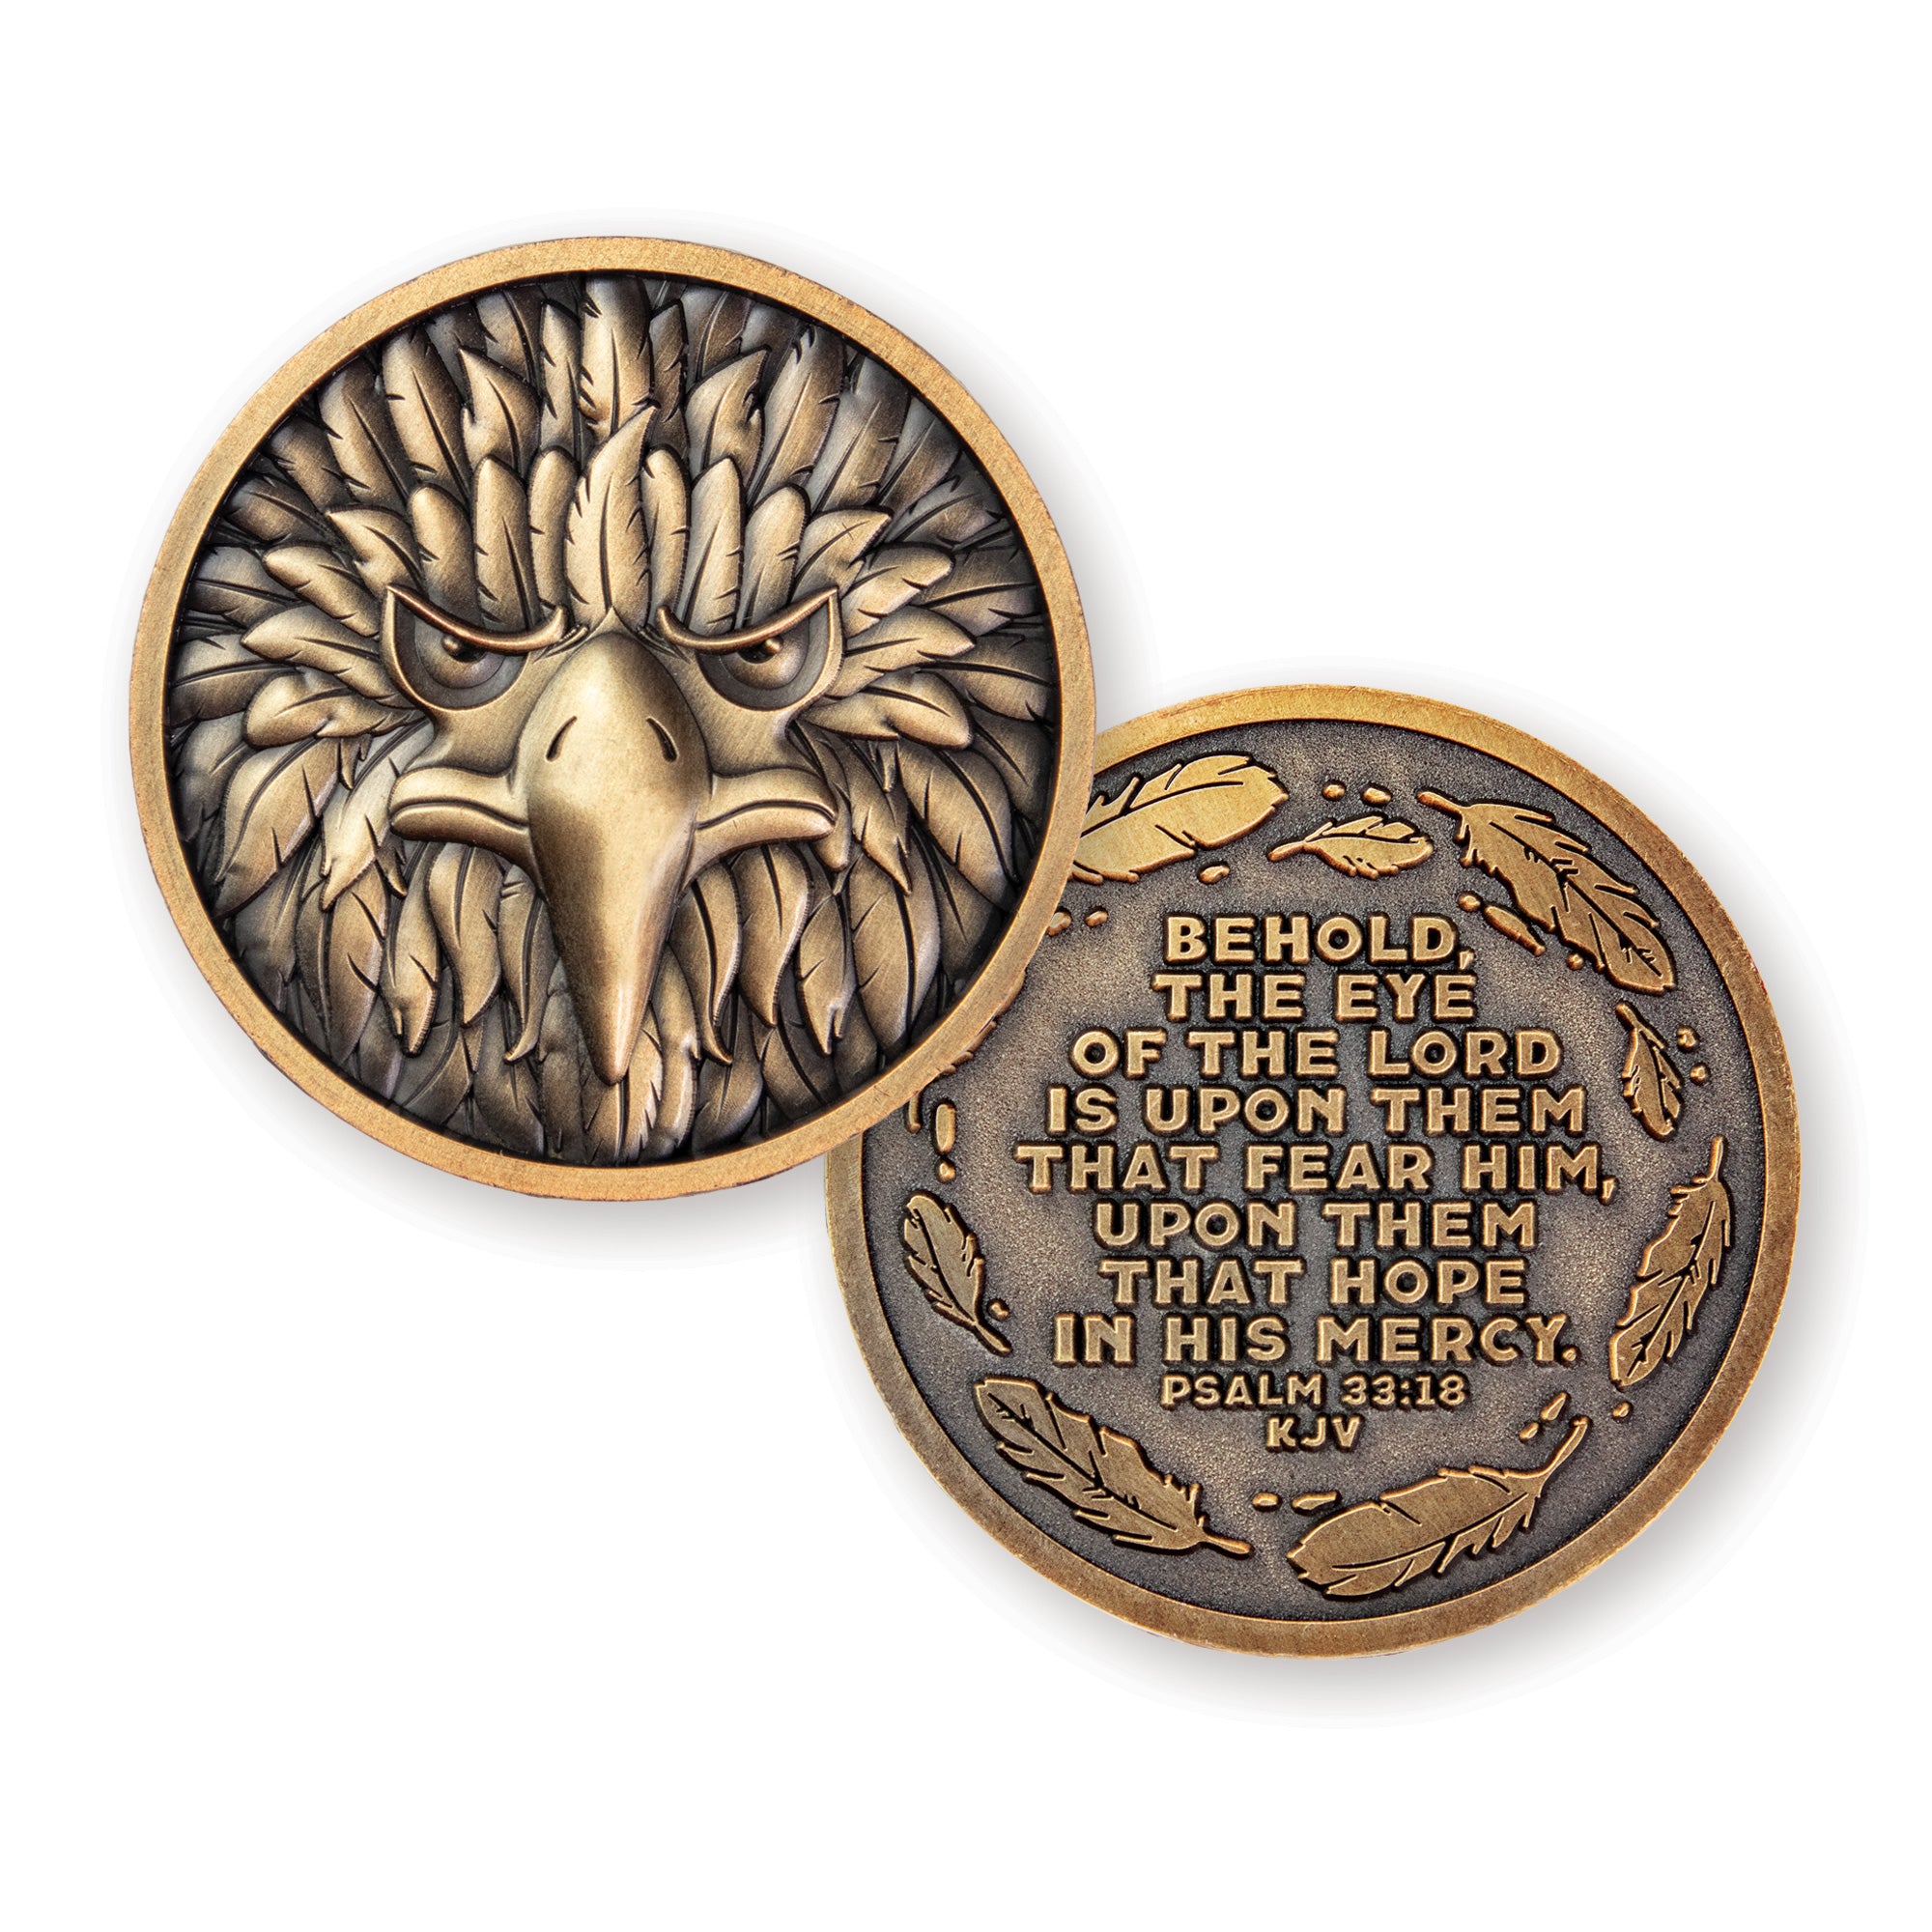 Eye of the Lord, Eagle’s Face – Psalm 33:18 KJV Challenge Coin